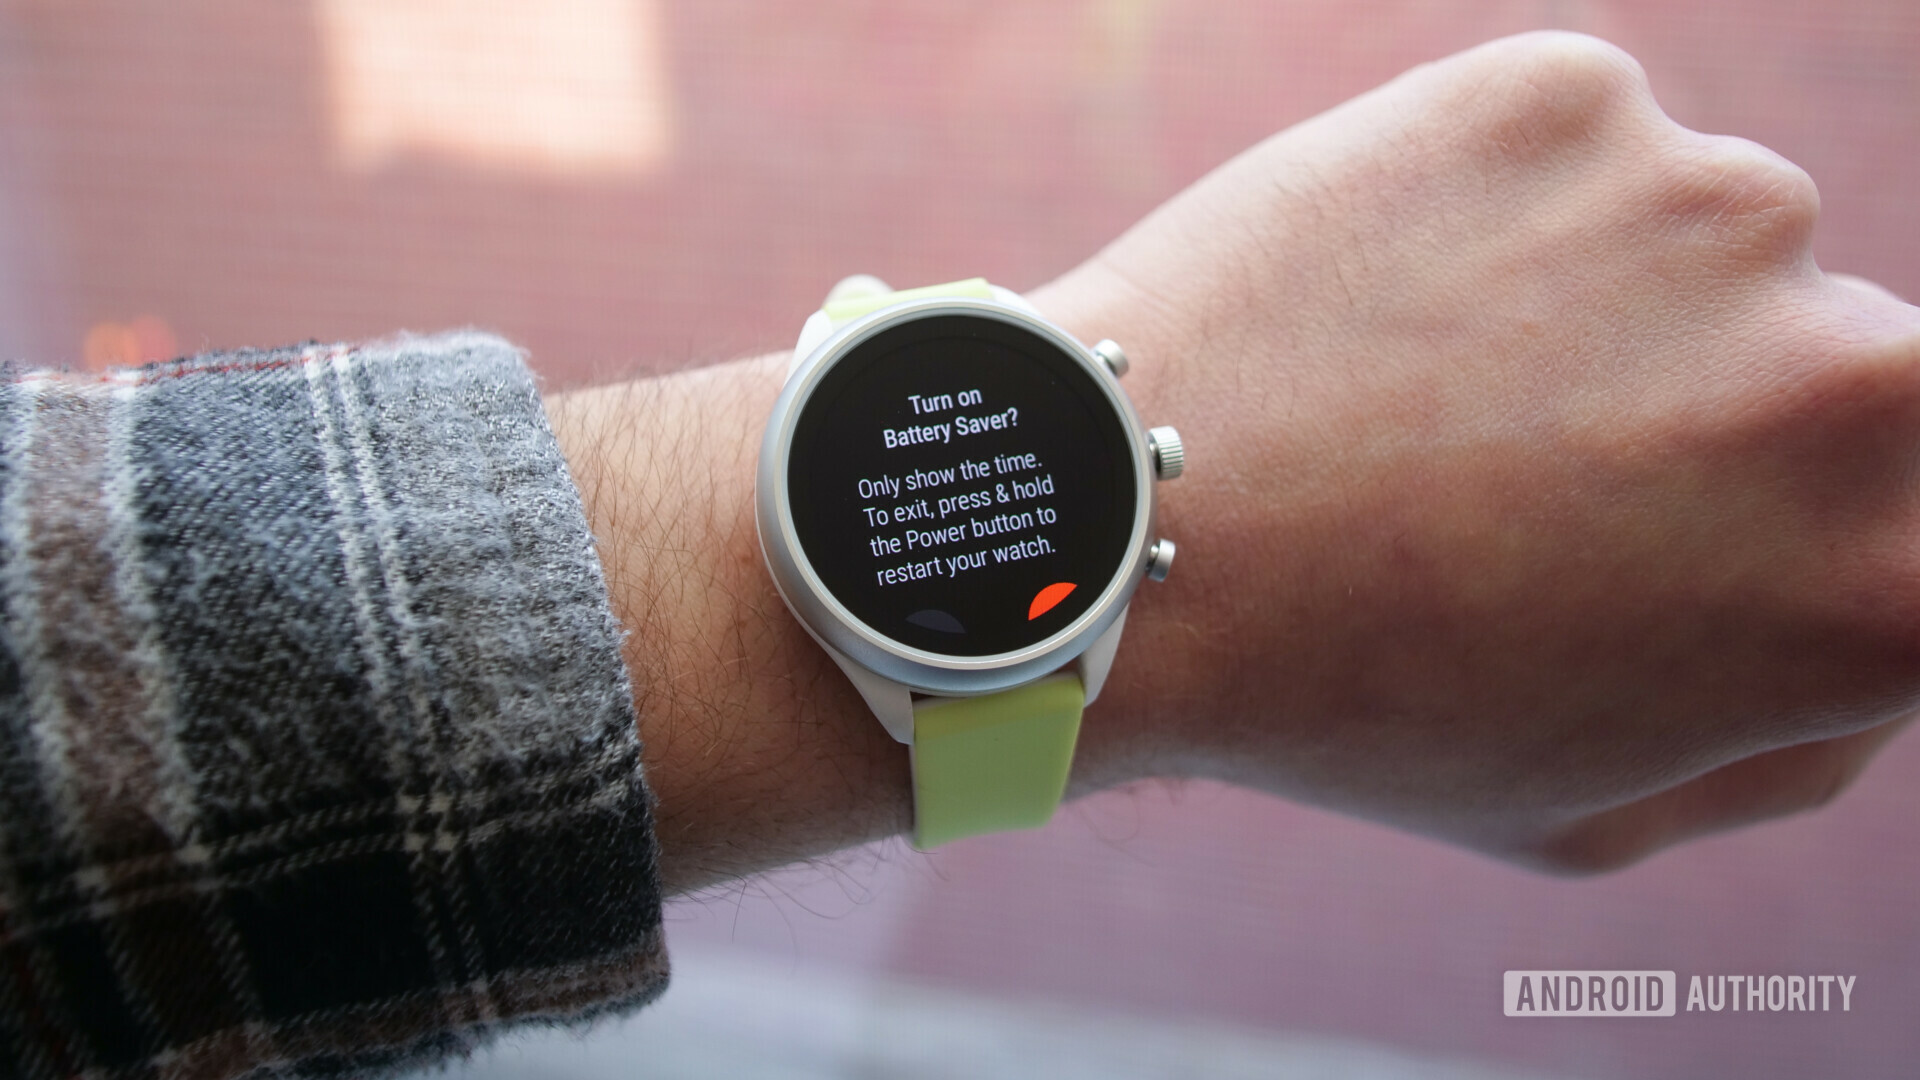 fossil sport smartwatch battery saver mode prompt